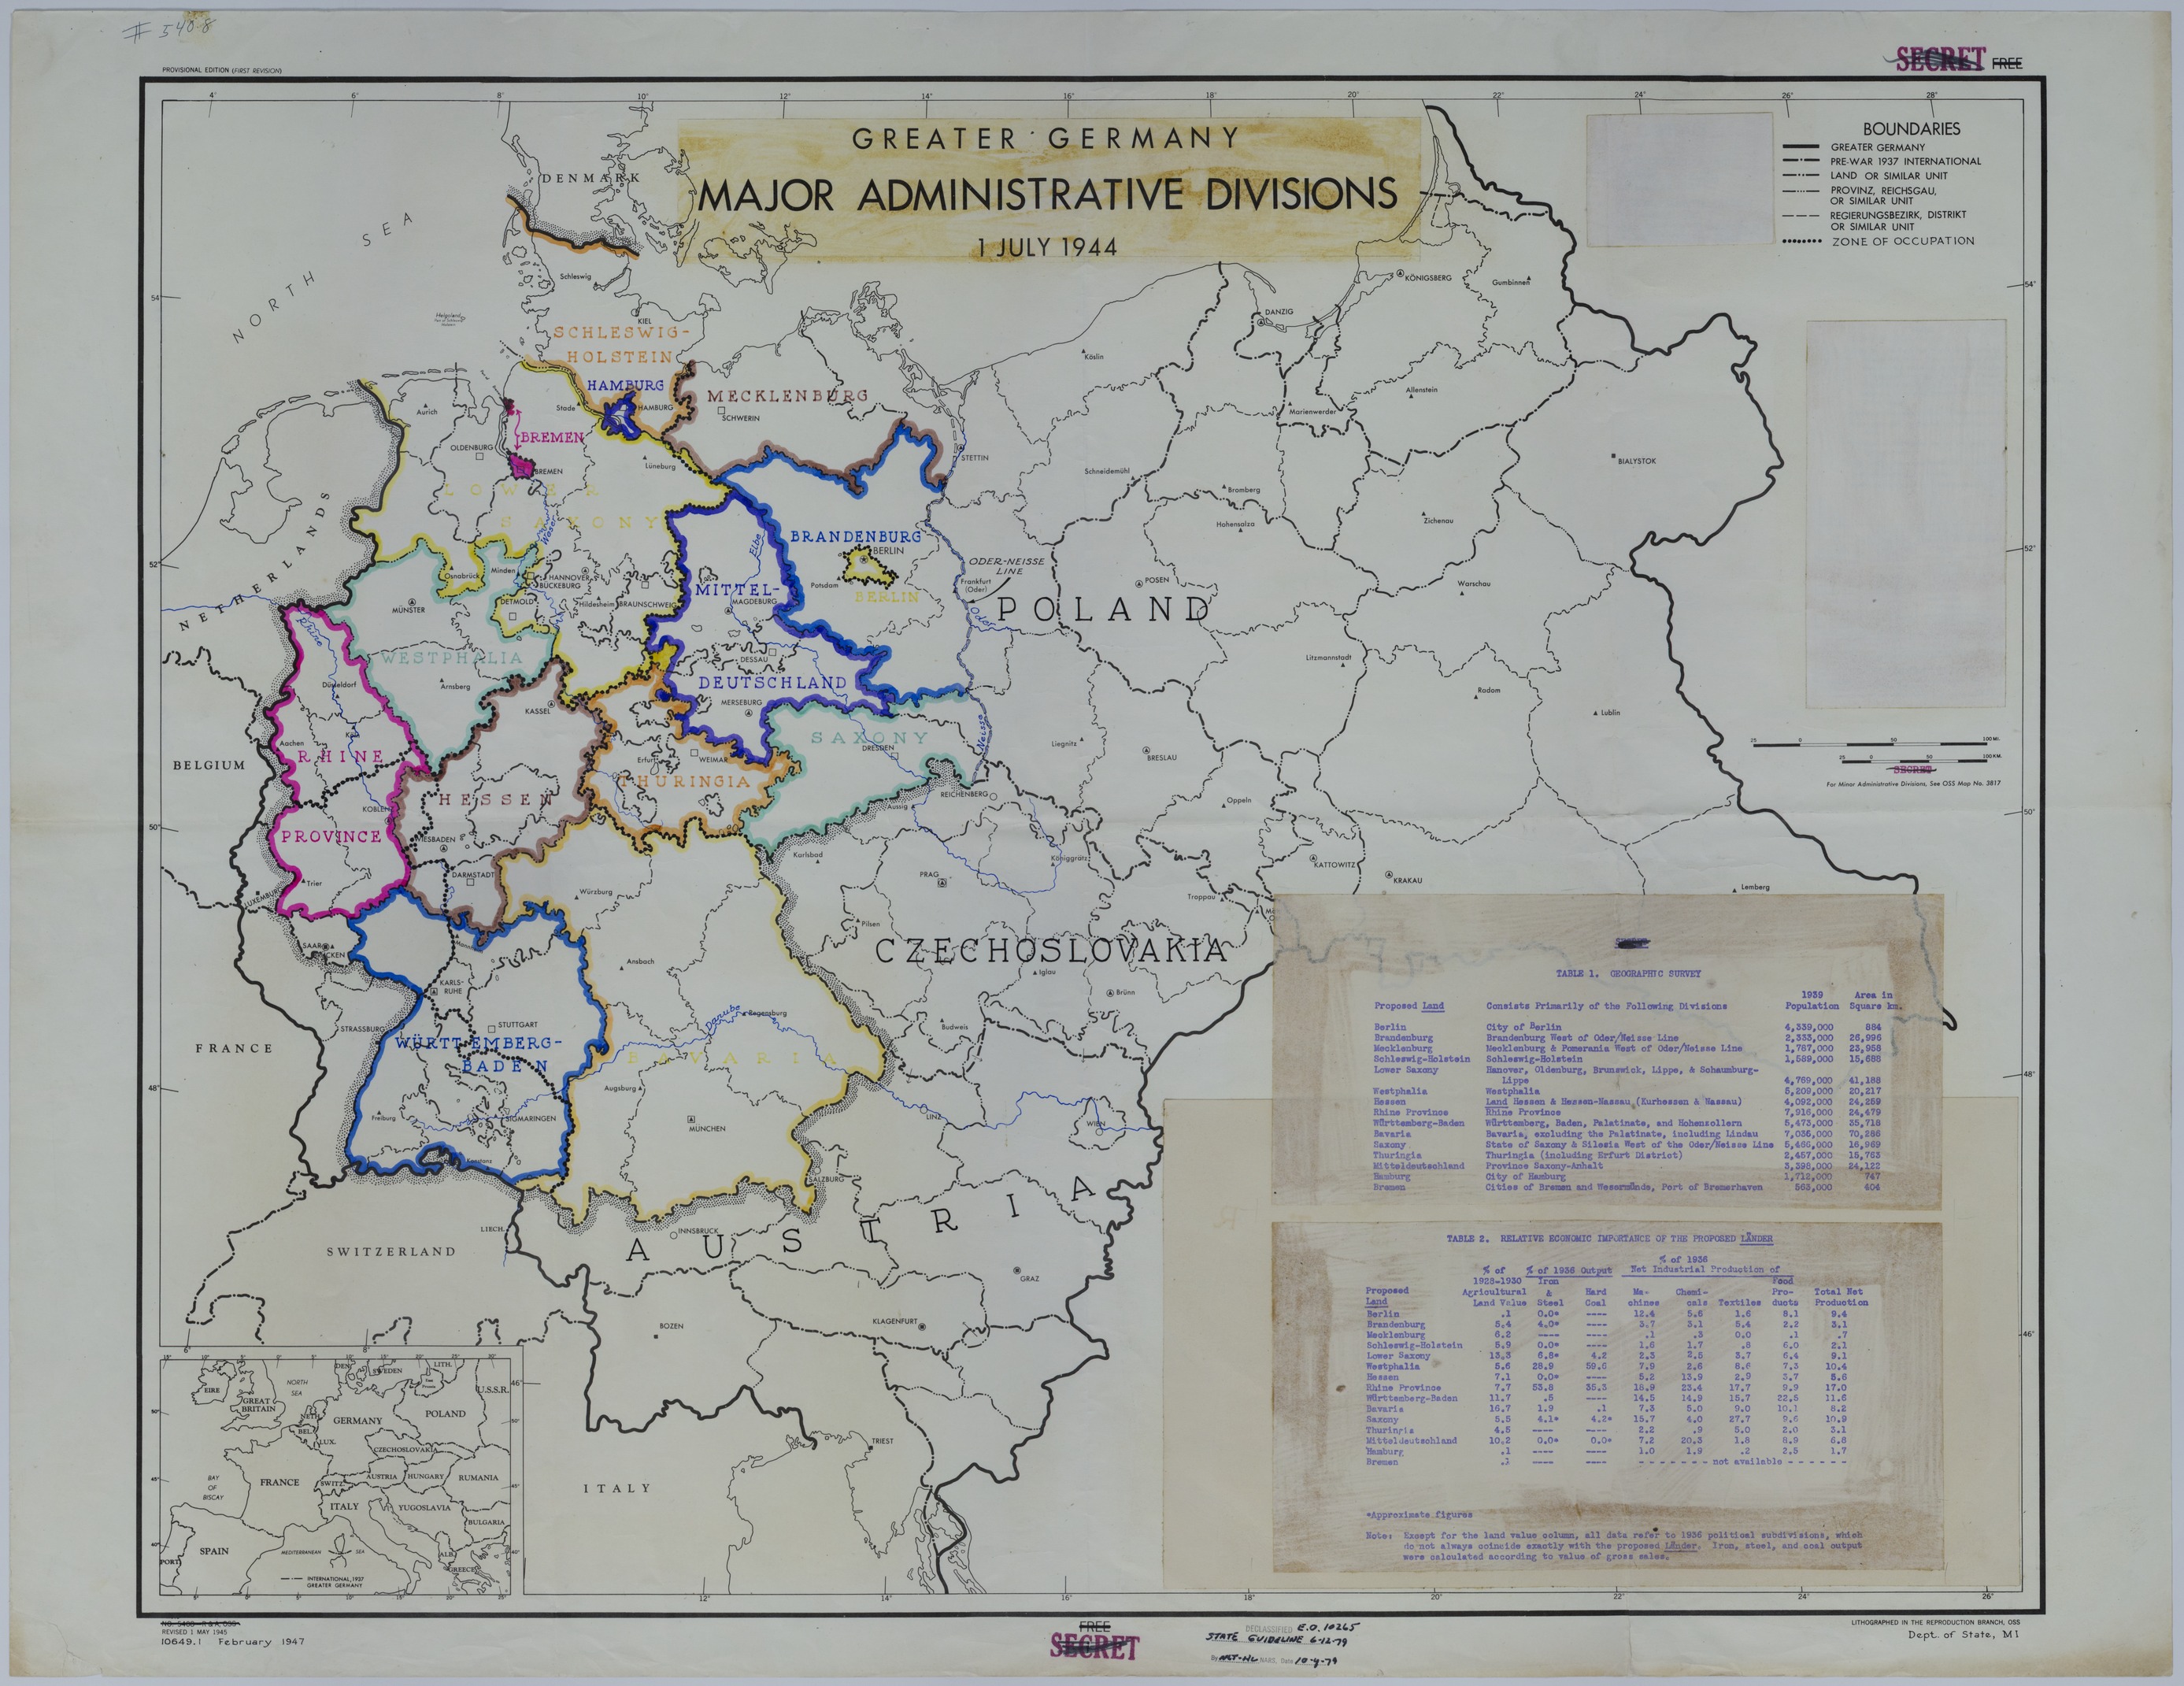 Map of the Major Administrative Divisions of Greater Germany